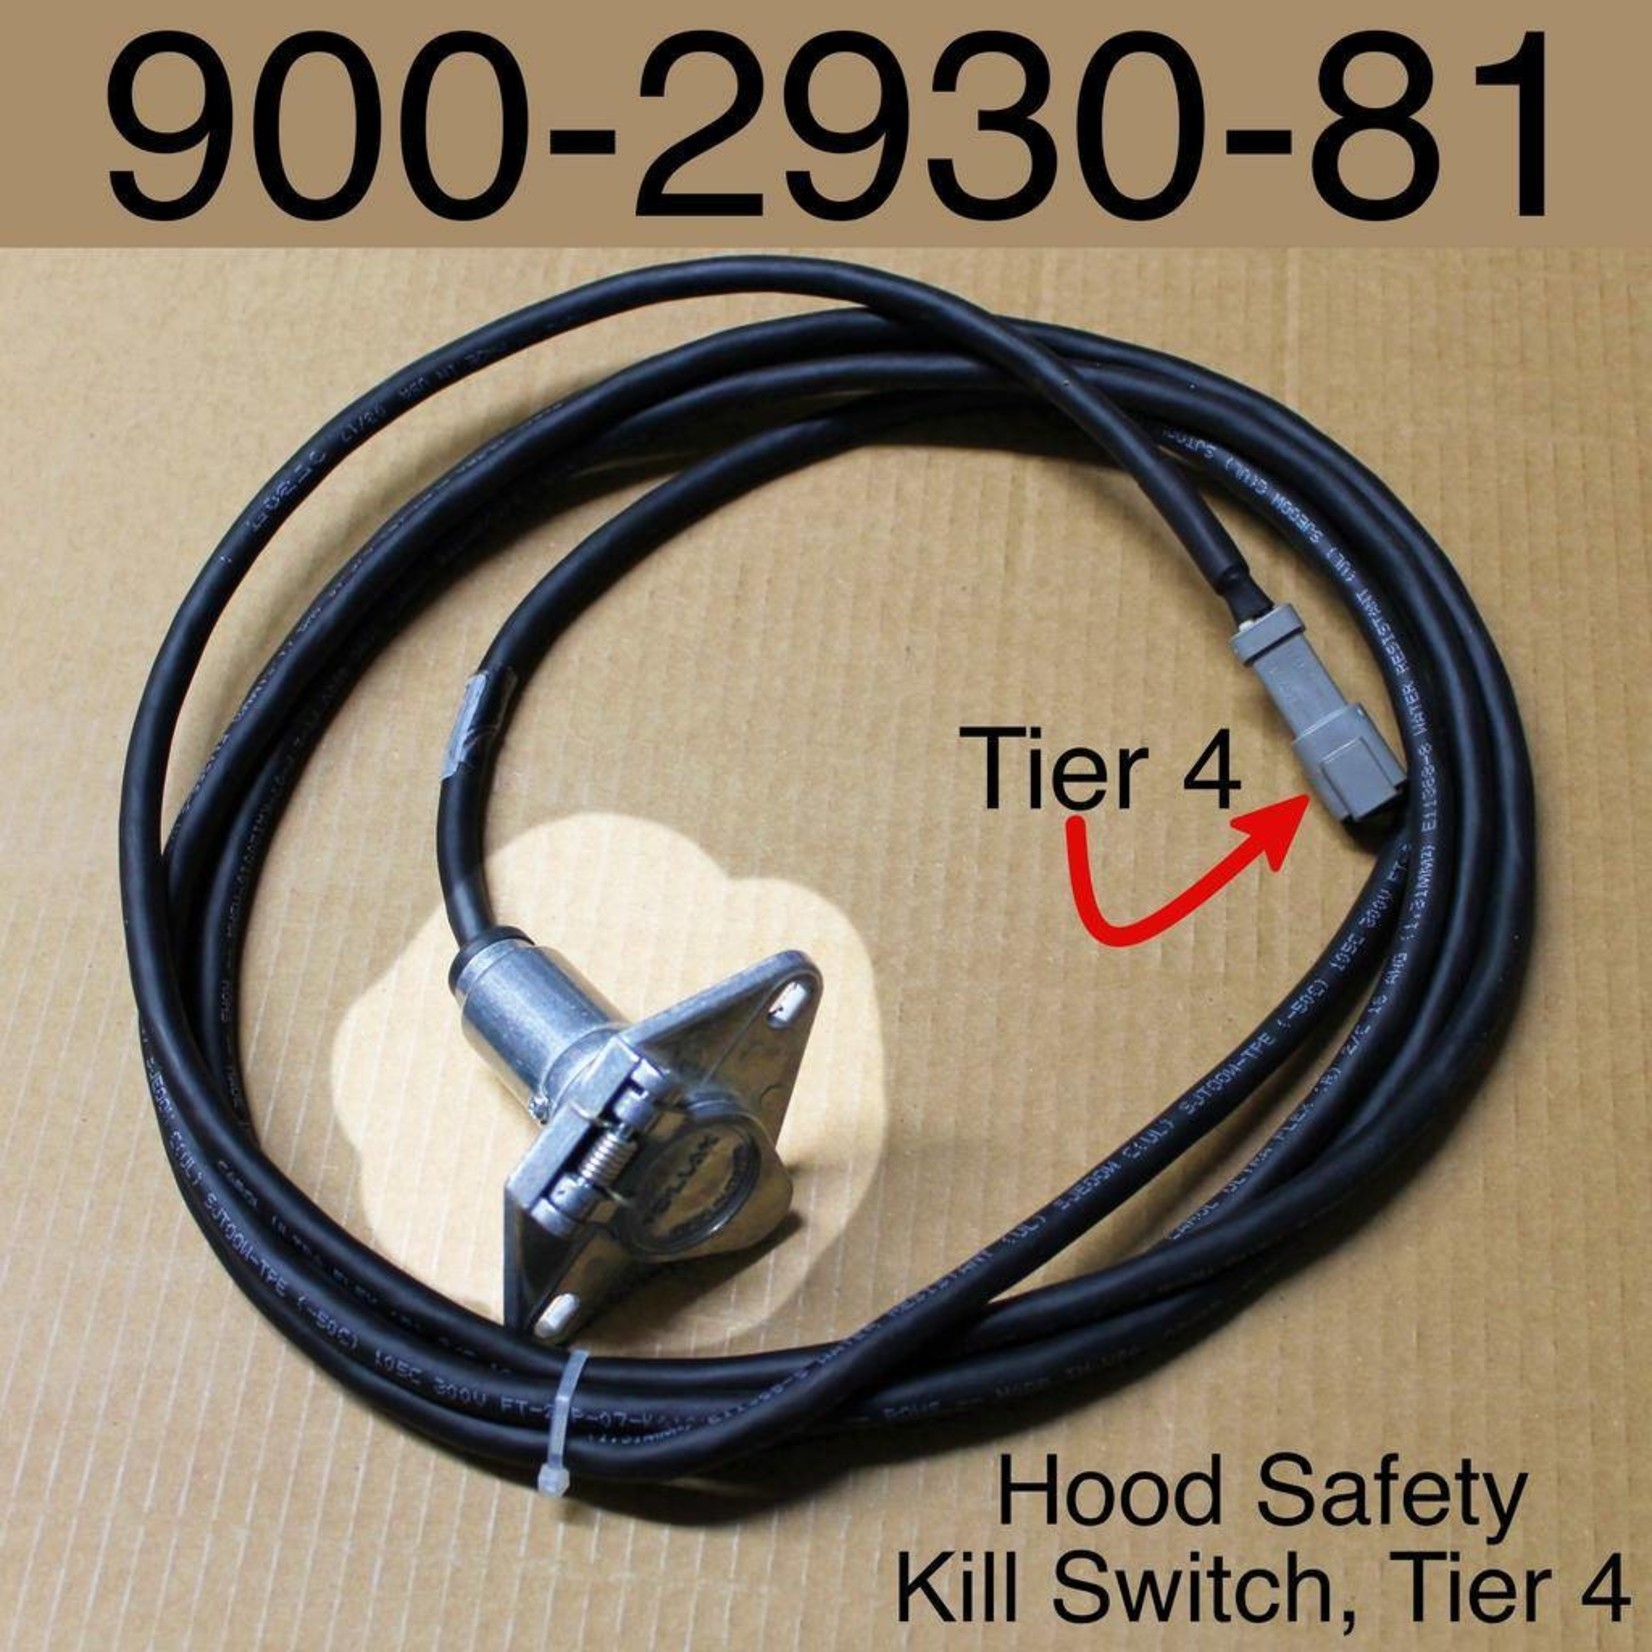 Wire Harness for Hood Safety Kill Switch Fits Tier 4 Only - Was 900-2930-81